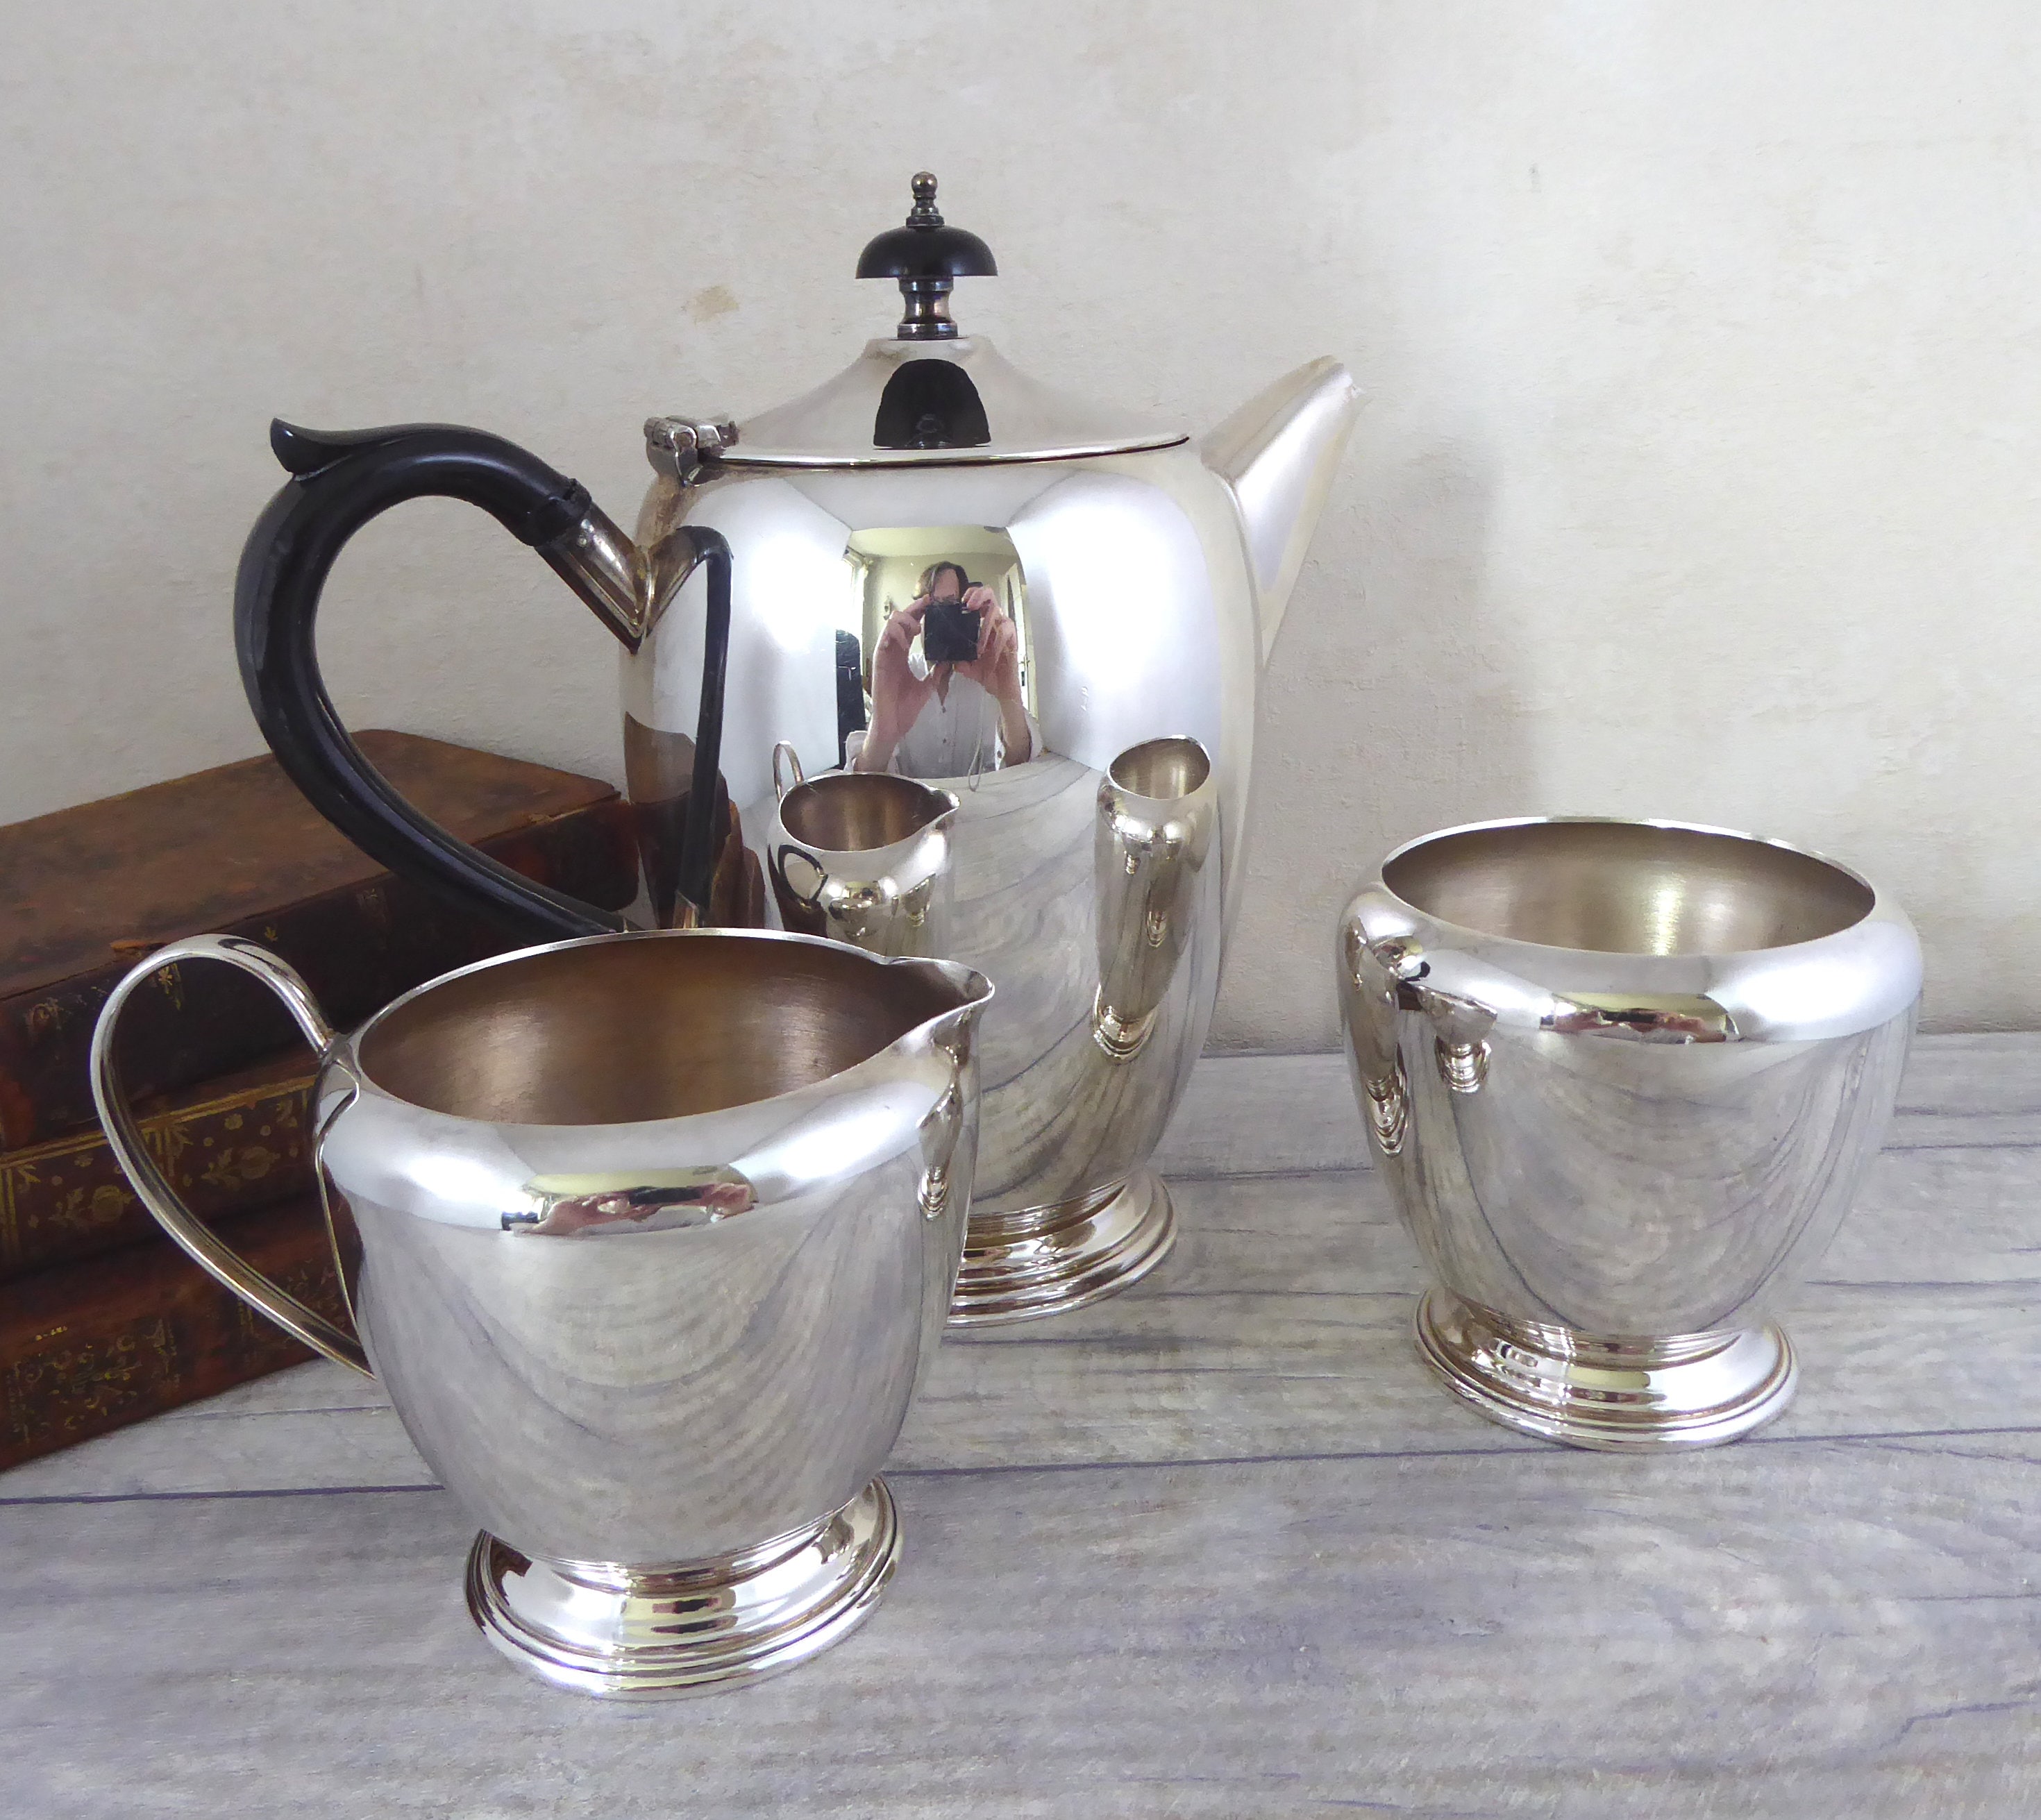 Pair of Vintage Hot Chocolate Jugs, English, Silver Plate, Coffee Serving  Pot For Sale at 1stDibs